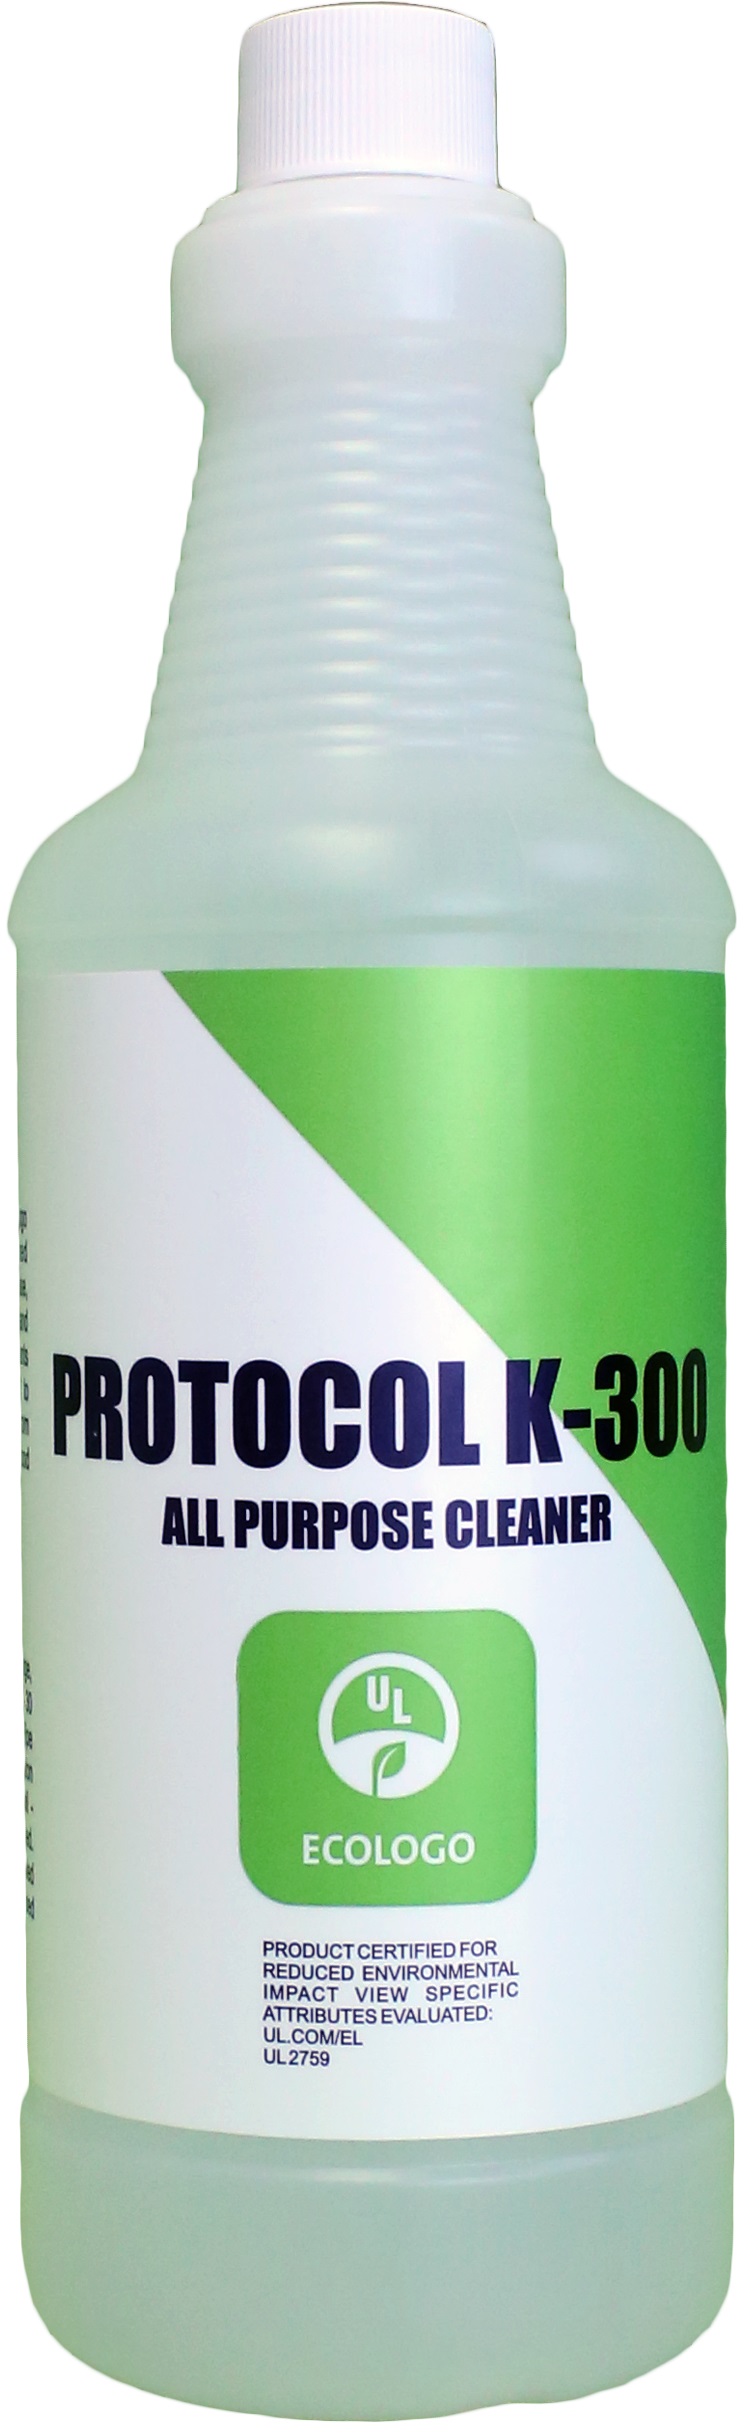 Protocol K300 UL Eco Certified All Purpoase Cleaner - 1 Litre